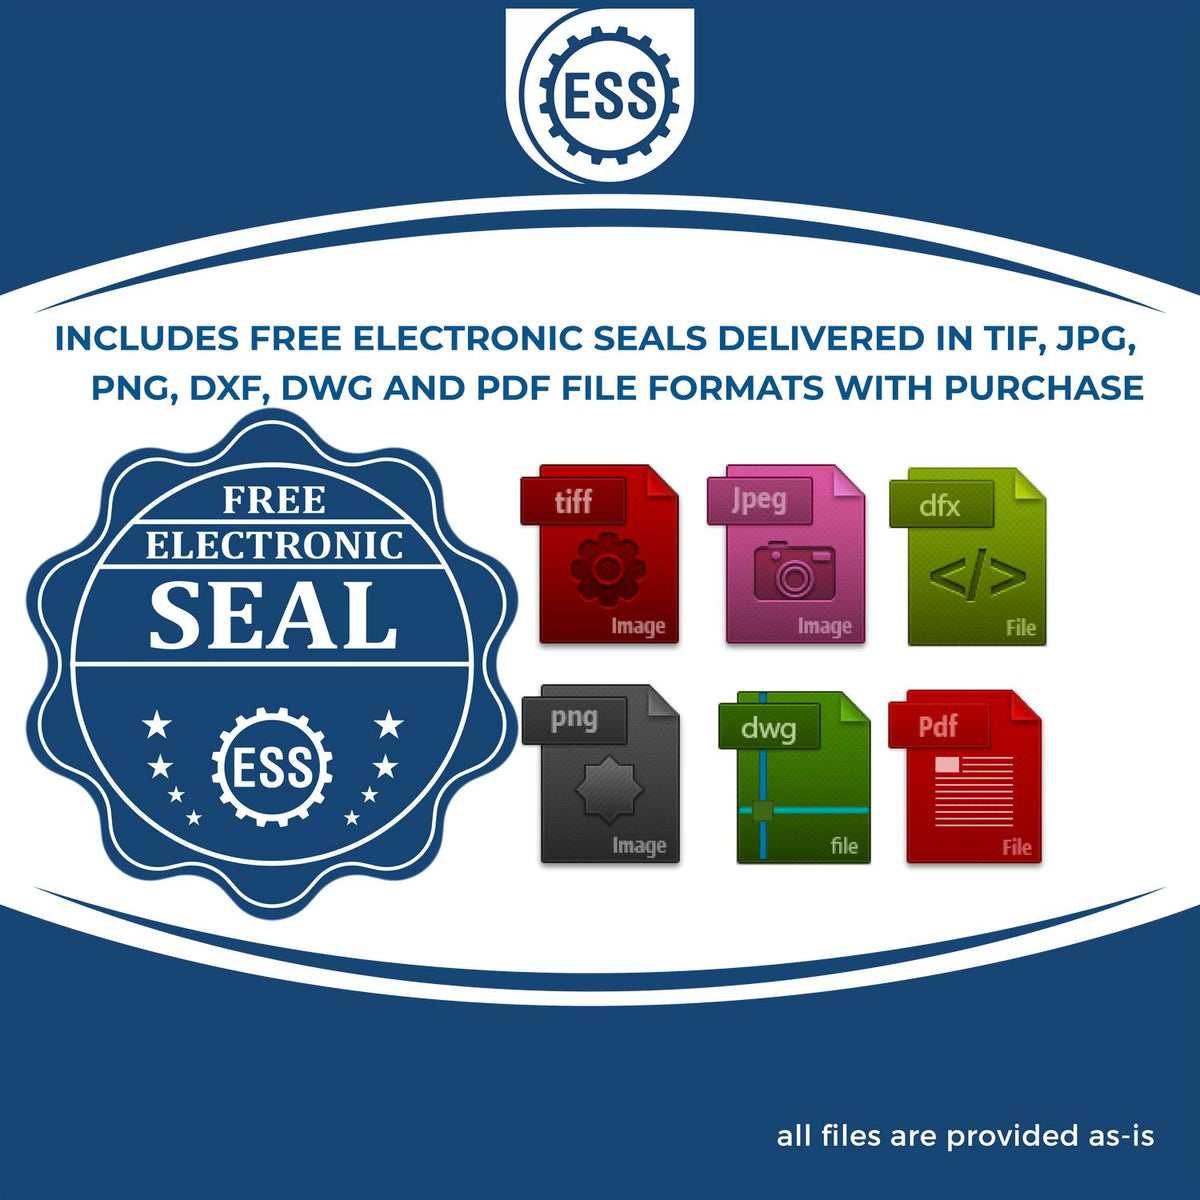 An infographic for the free electronic seal for the Gift Indiana Engineer Seal illustrating the different file type icons such as DXF, DWG, TIF, JPG and PNG.